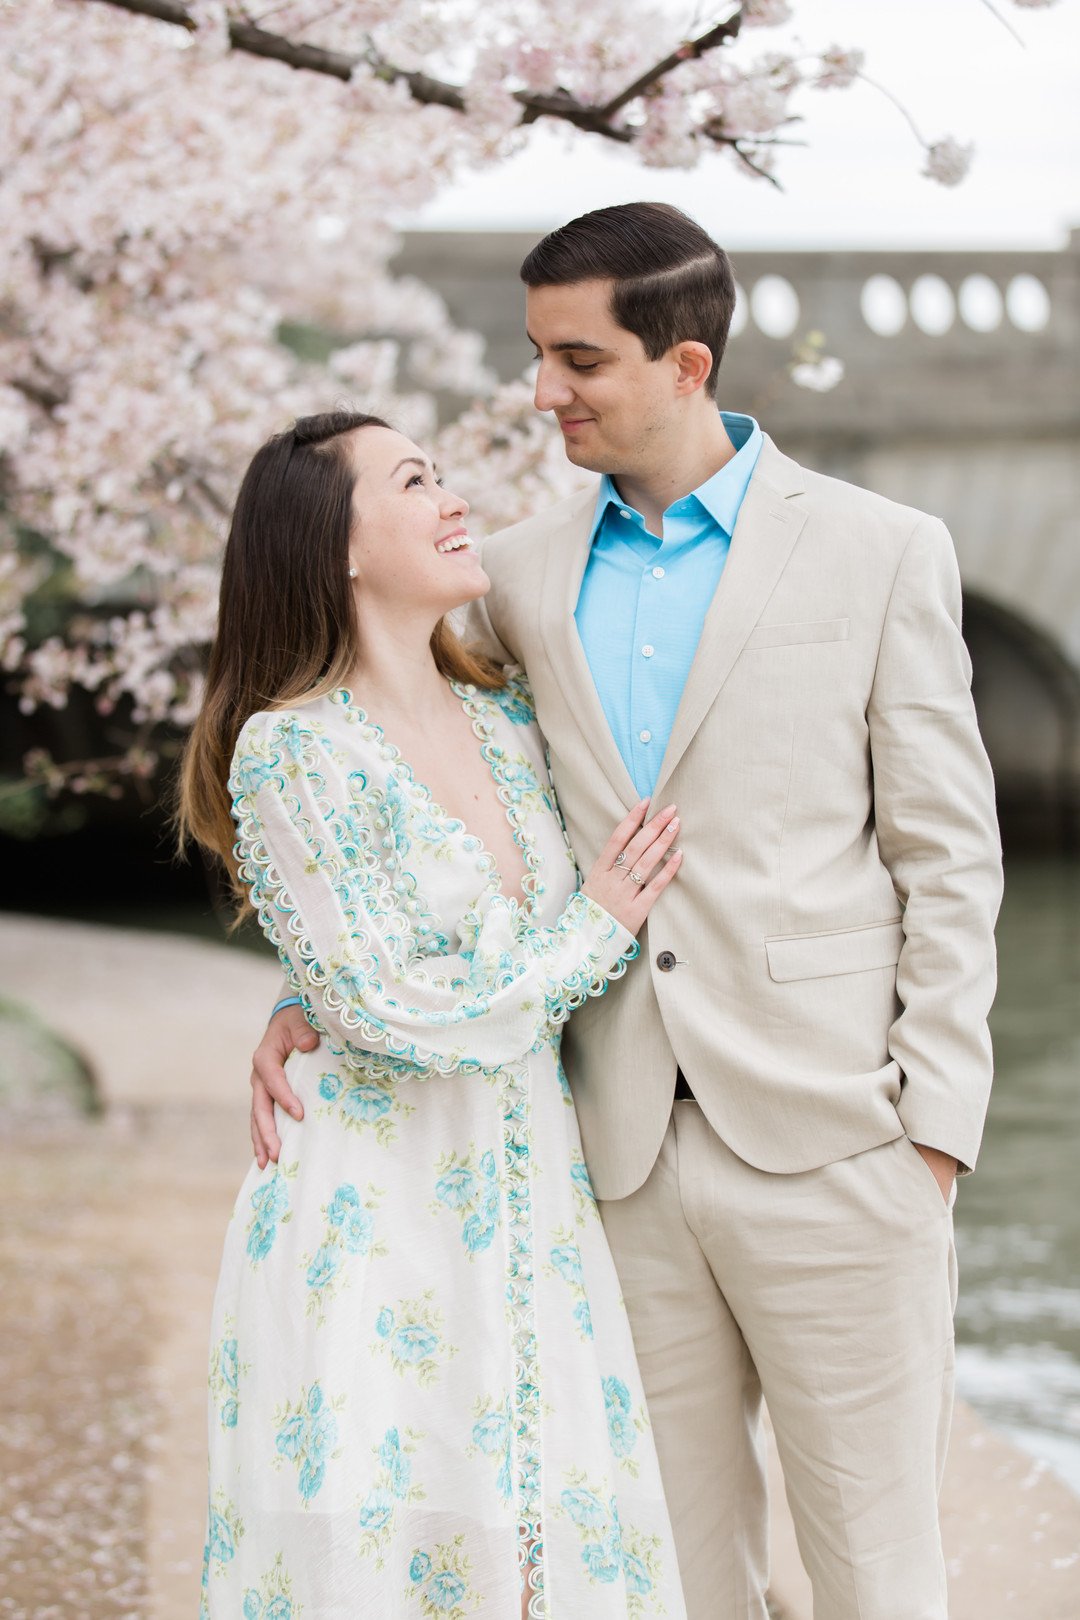 Pietra Ingenito + Chris Nary | Candice Adelle Photography10